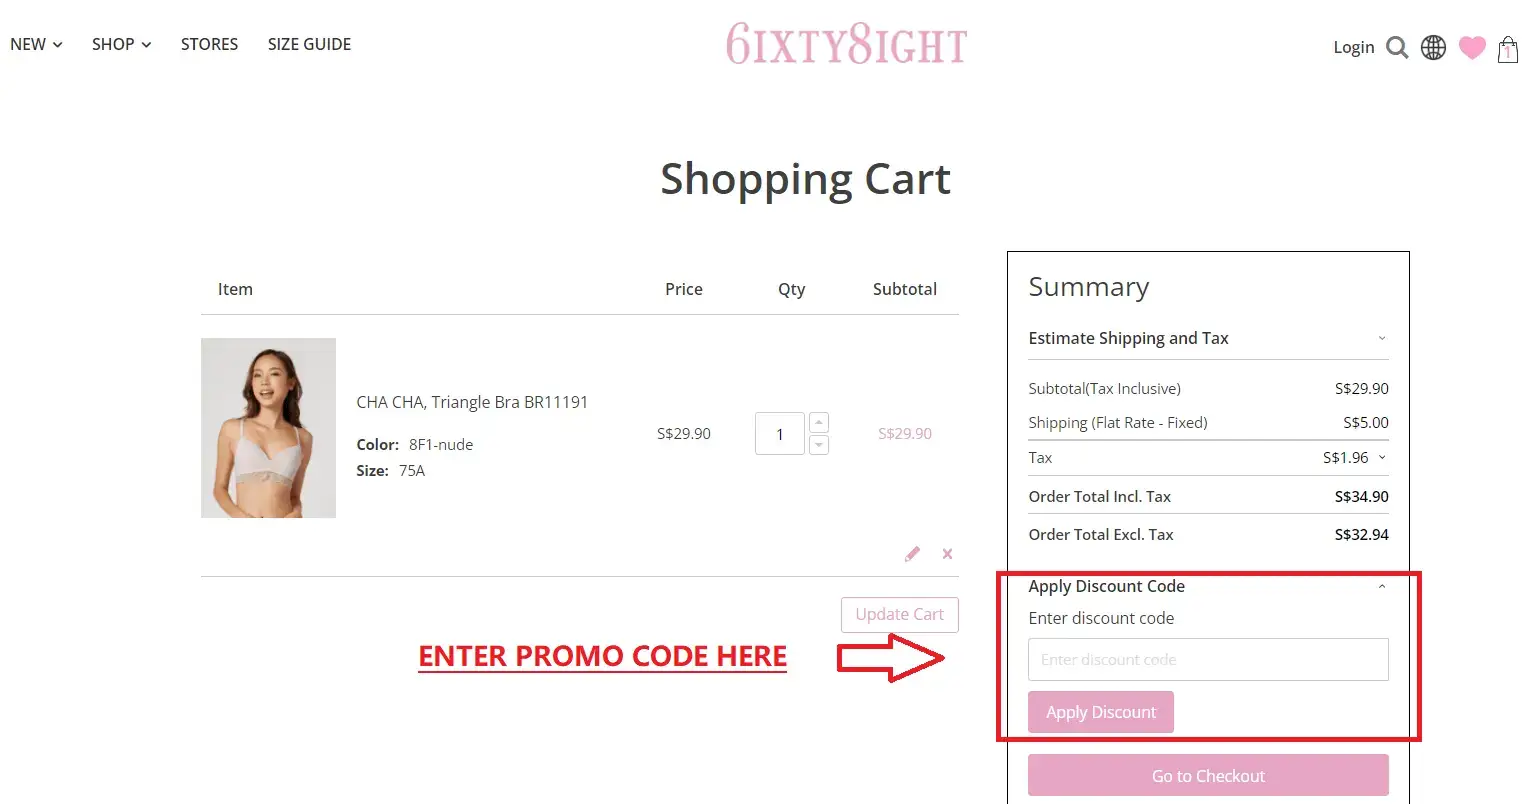 how to use 6ixty8ight promo code